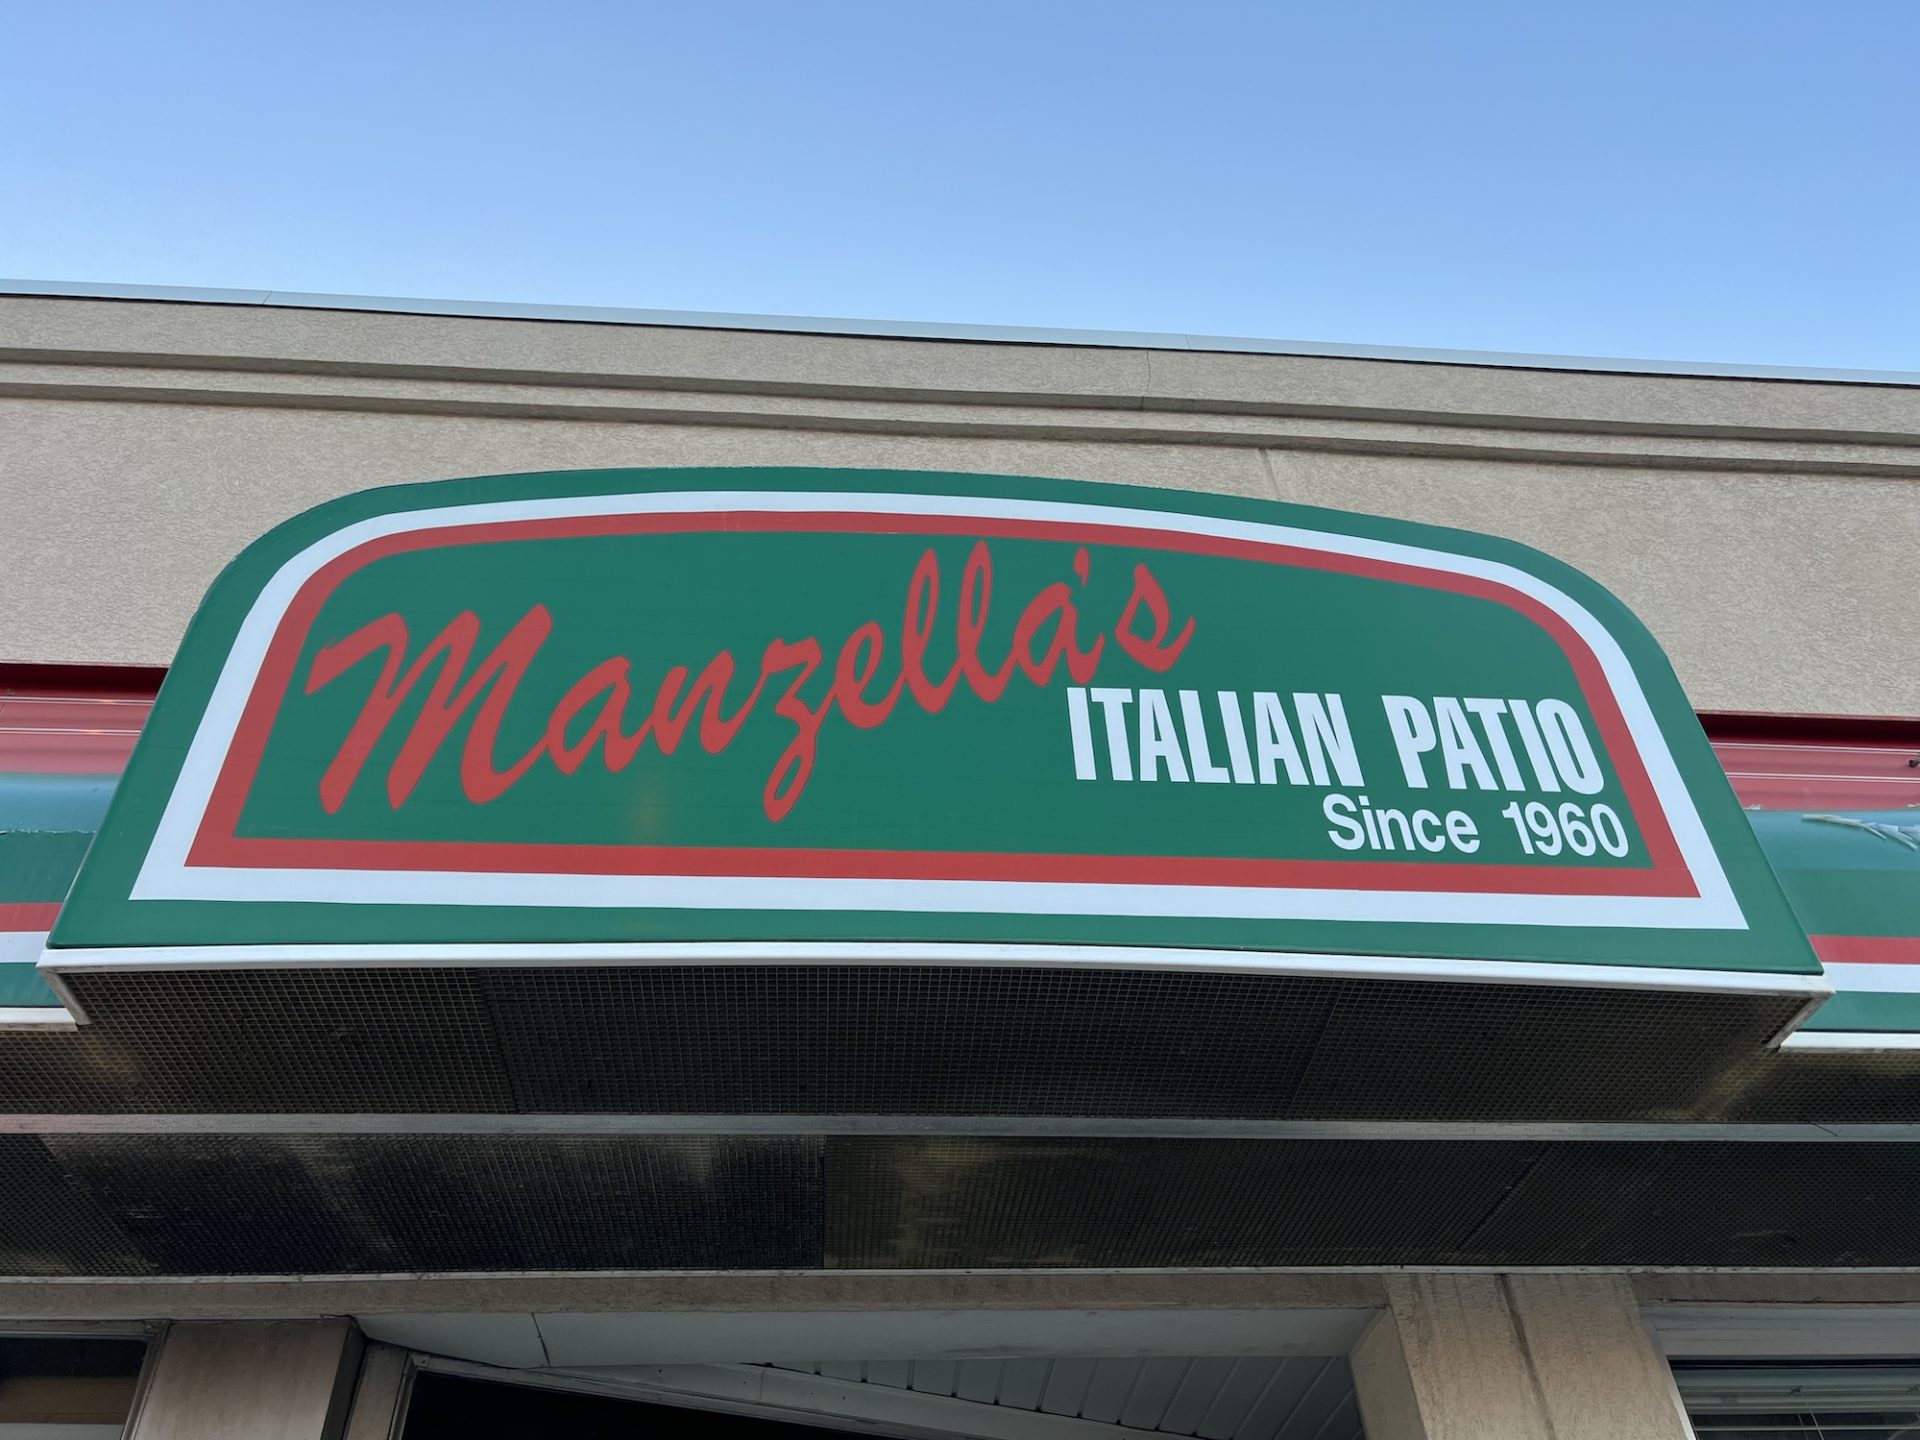 Close-up of Manzella's outdoor sign which is bright green with red and white writing